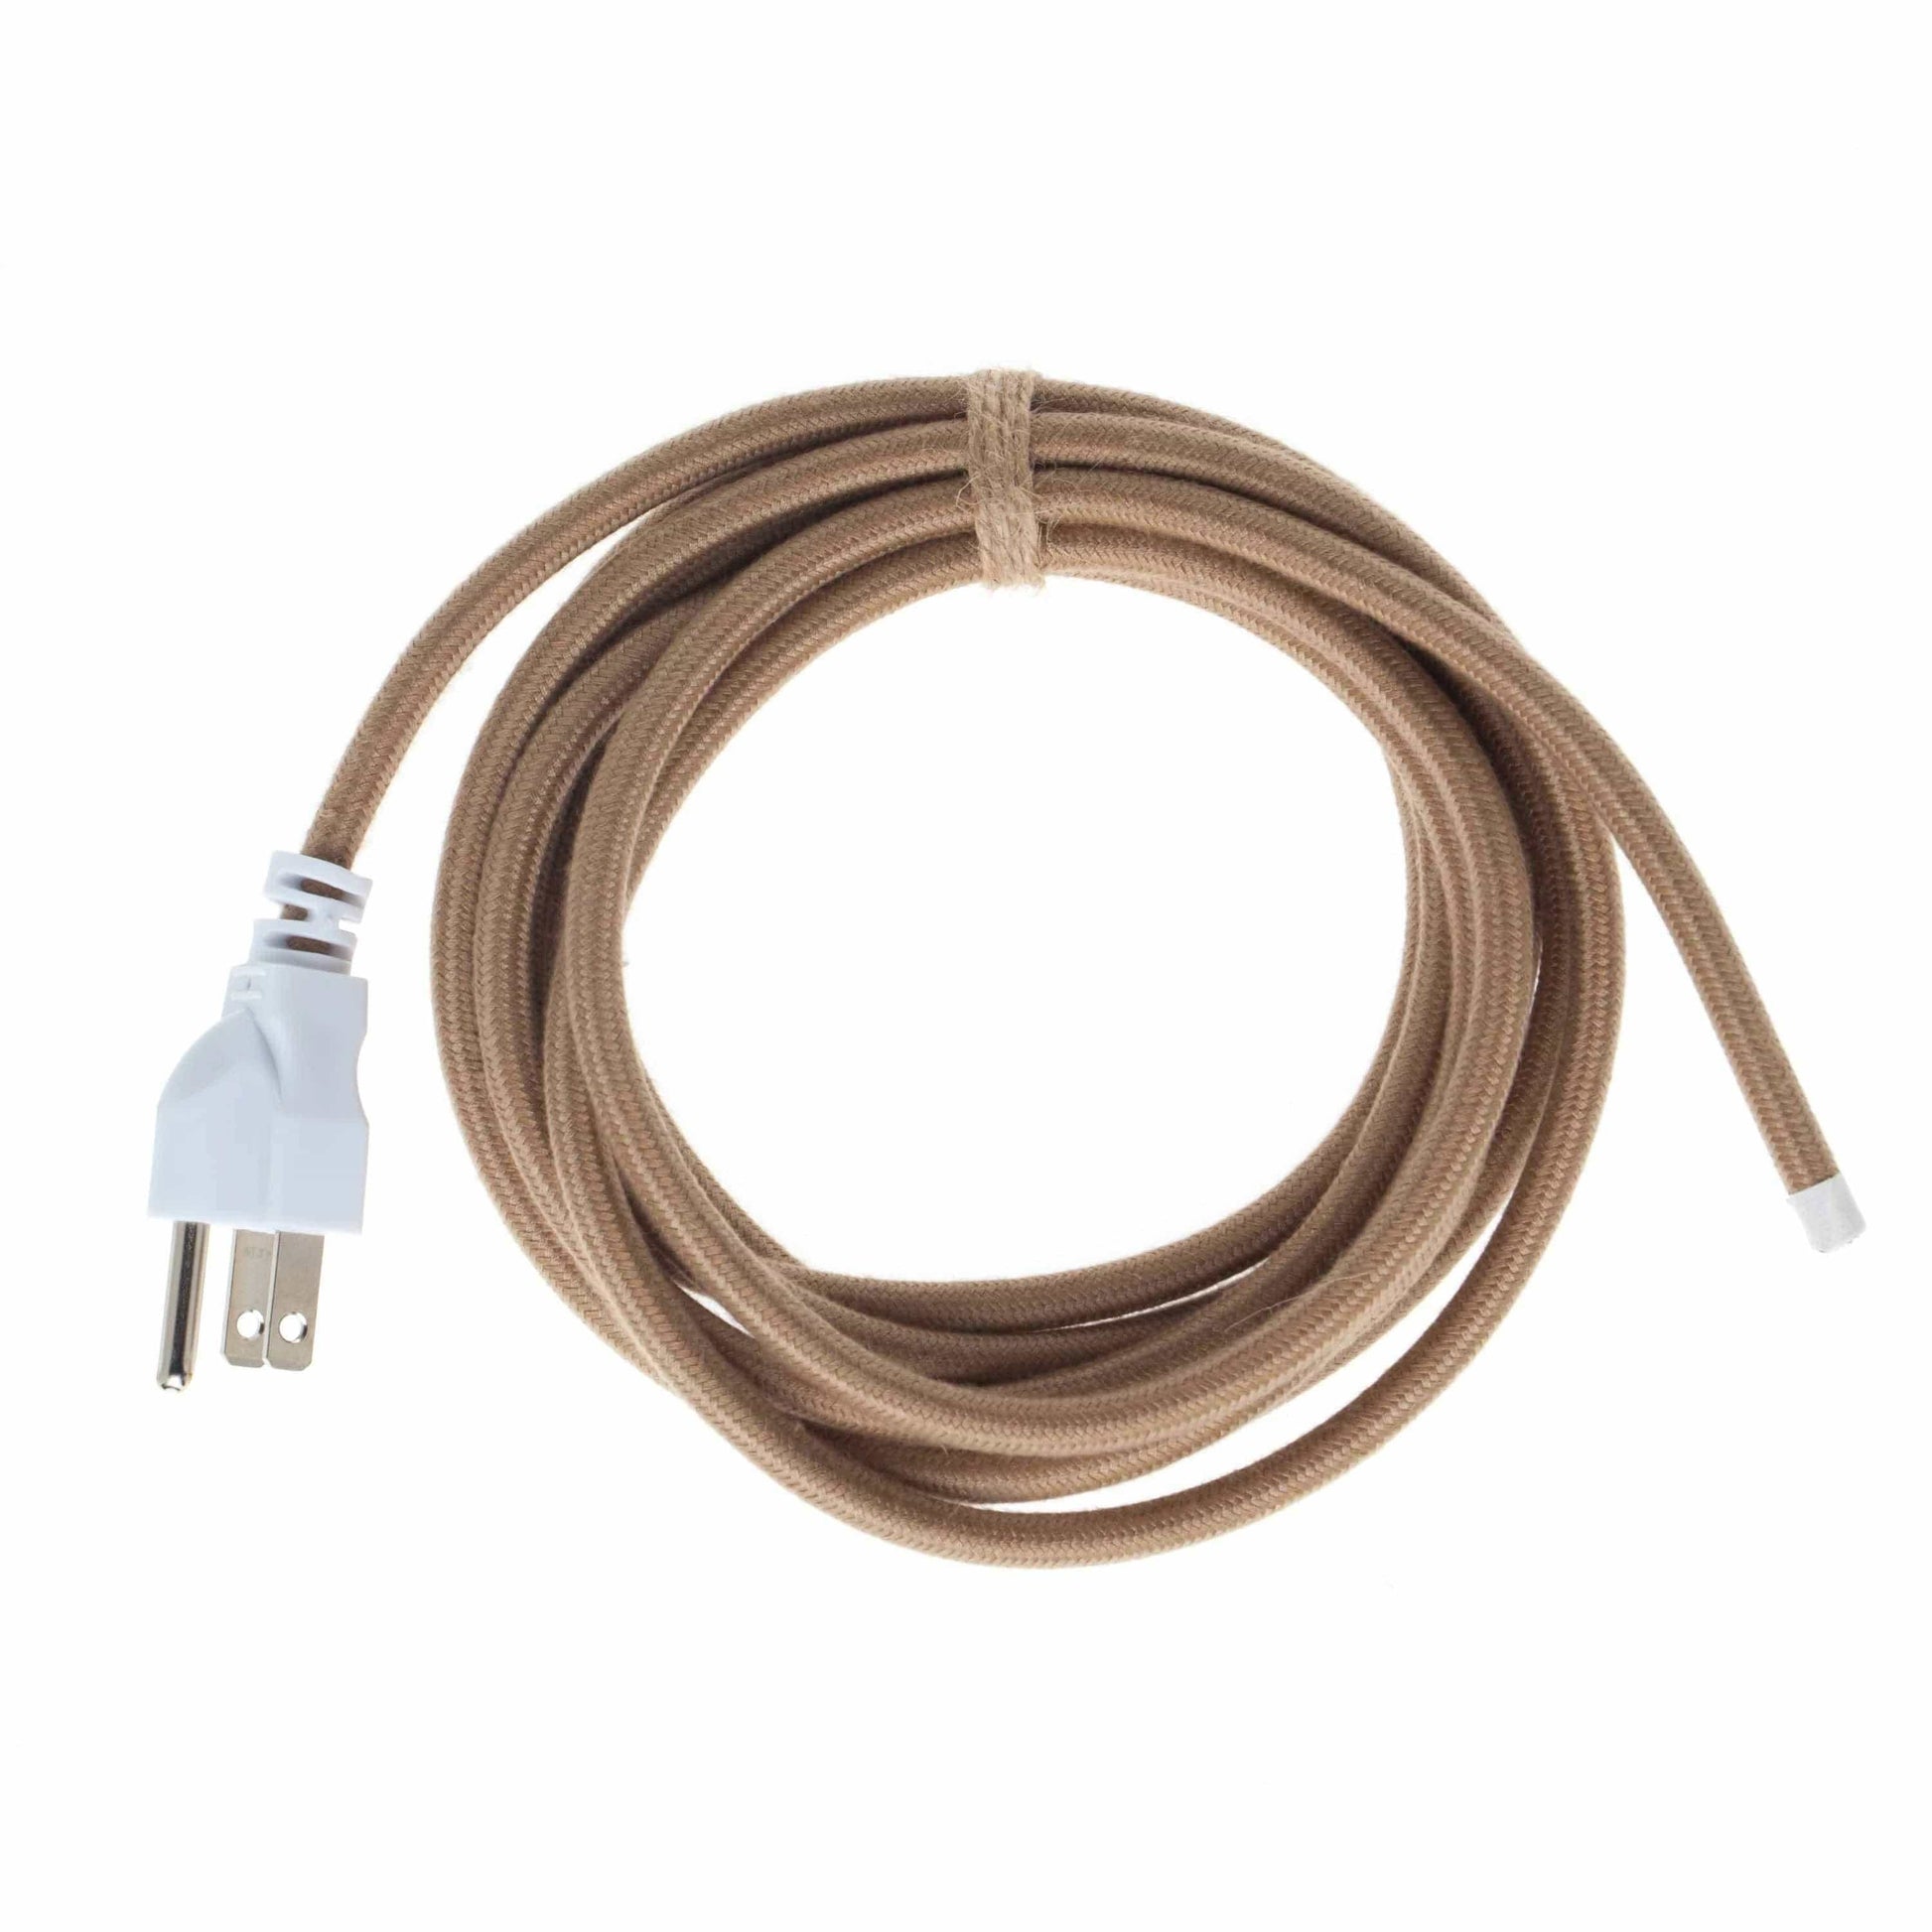 3-Prong Power Cord Whip - Customize - Latte